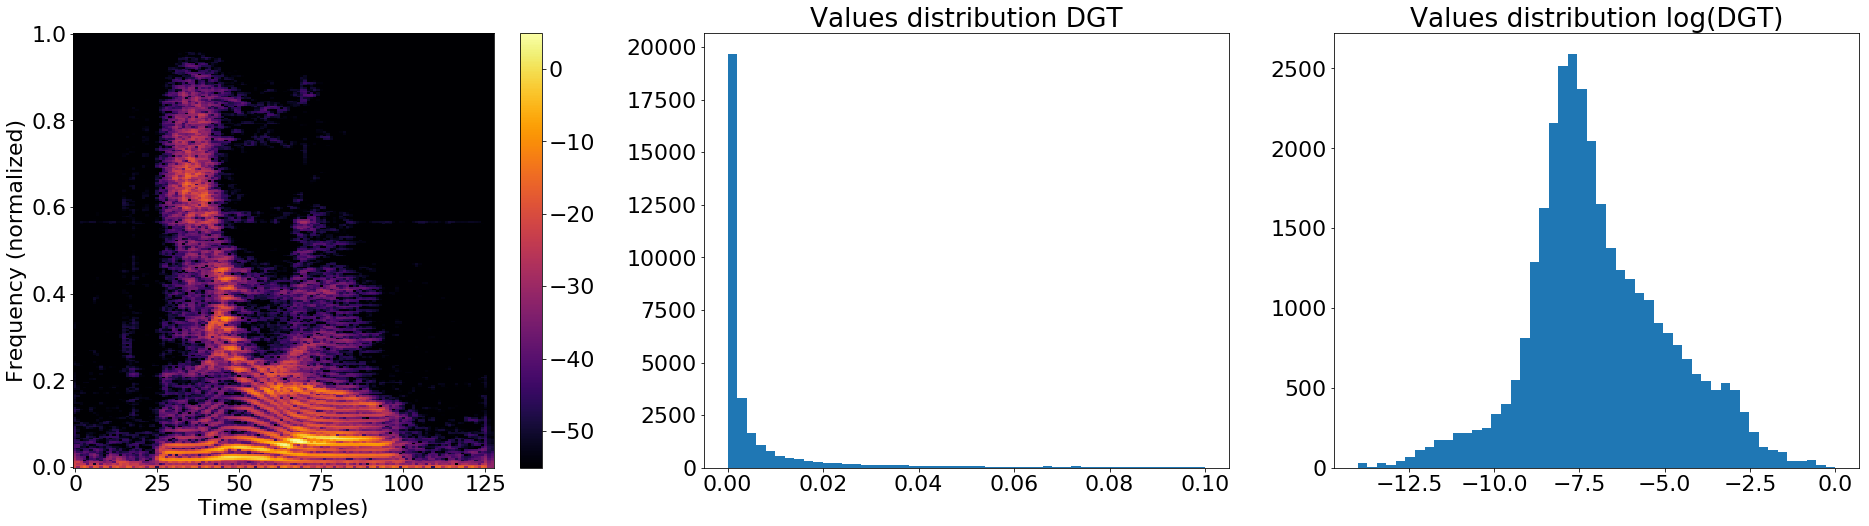 Change in distributions from spectrogram to log-spectrogam